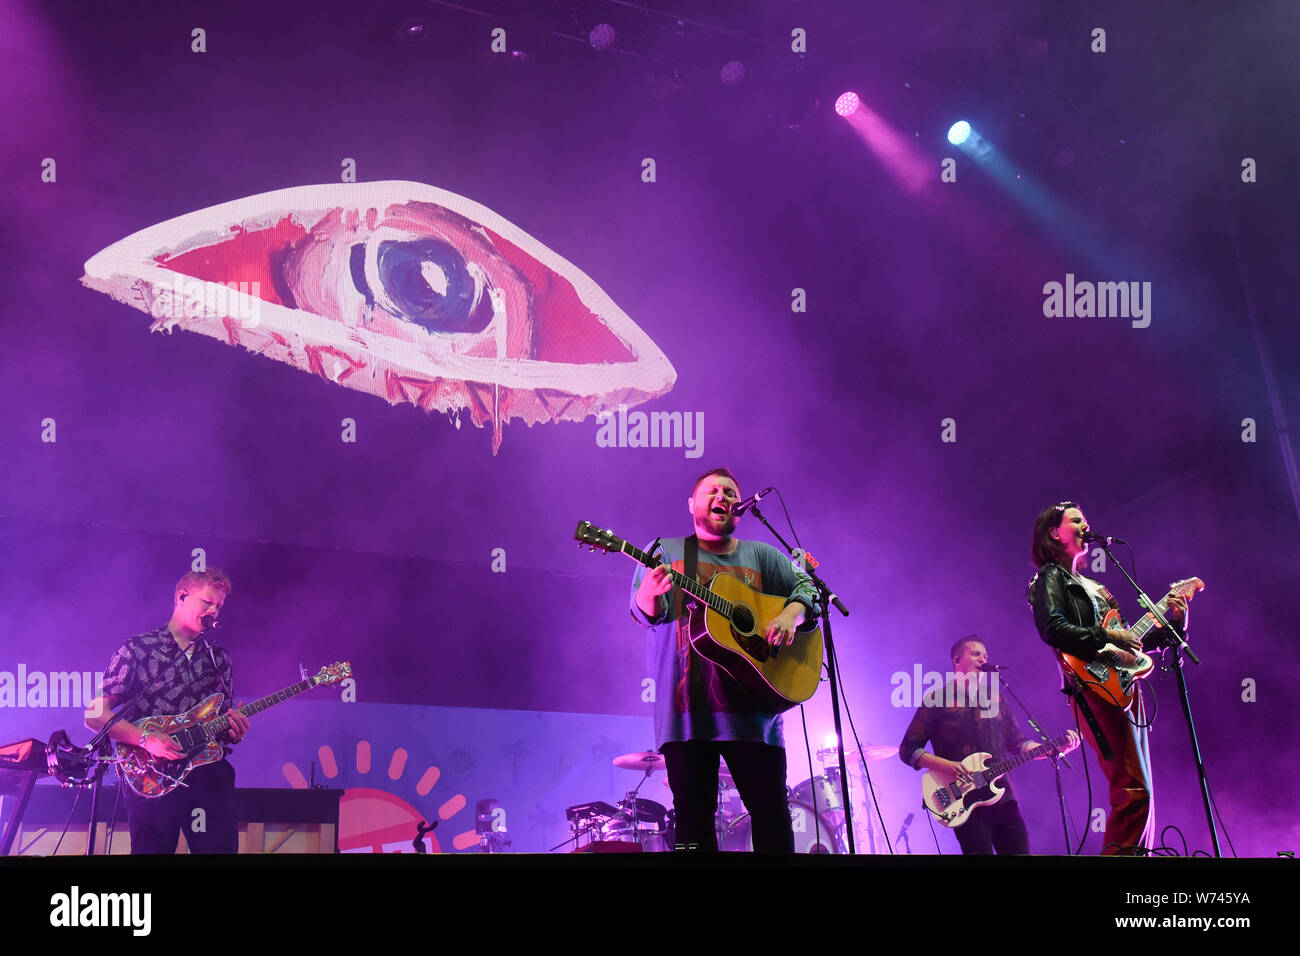 Long Beach, California, USA. 3rd Aug 2019. Of Monsters and Men performs at ALT 98.7 Summer Camp at the Queen Mary in Long Beach on August 3, 2019. Credit: The Photo Access/Alamy Live News Stock Photo